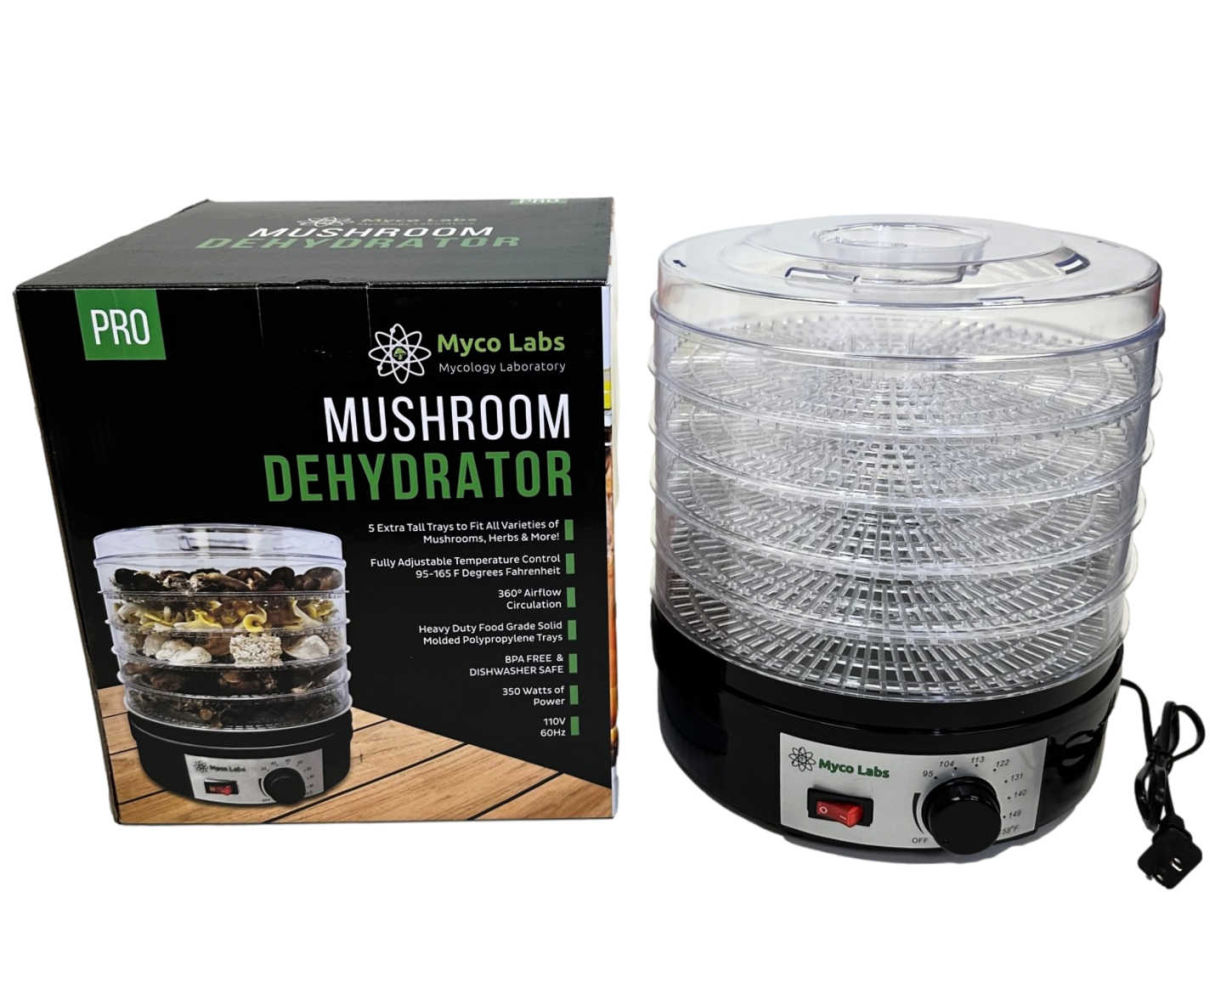 http://www.midwestgrowkits.com/Shared/Images/Product/Mycolabs-350W-Mushroom-Dehydrator-With-Adjustable-Temperature-Control/Dehydrator_Final_web.jpg